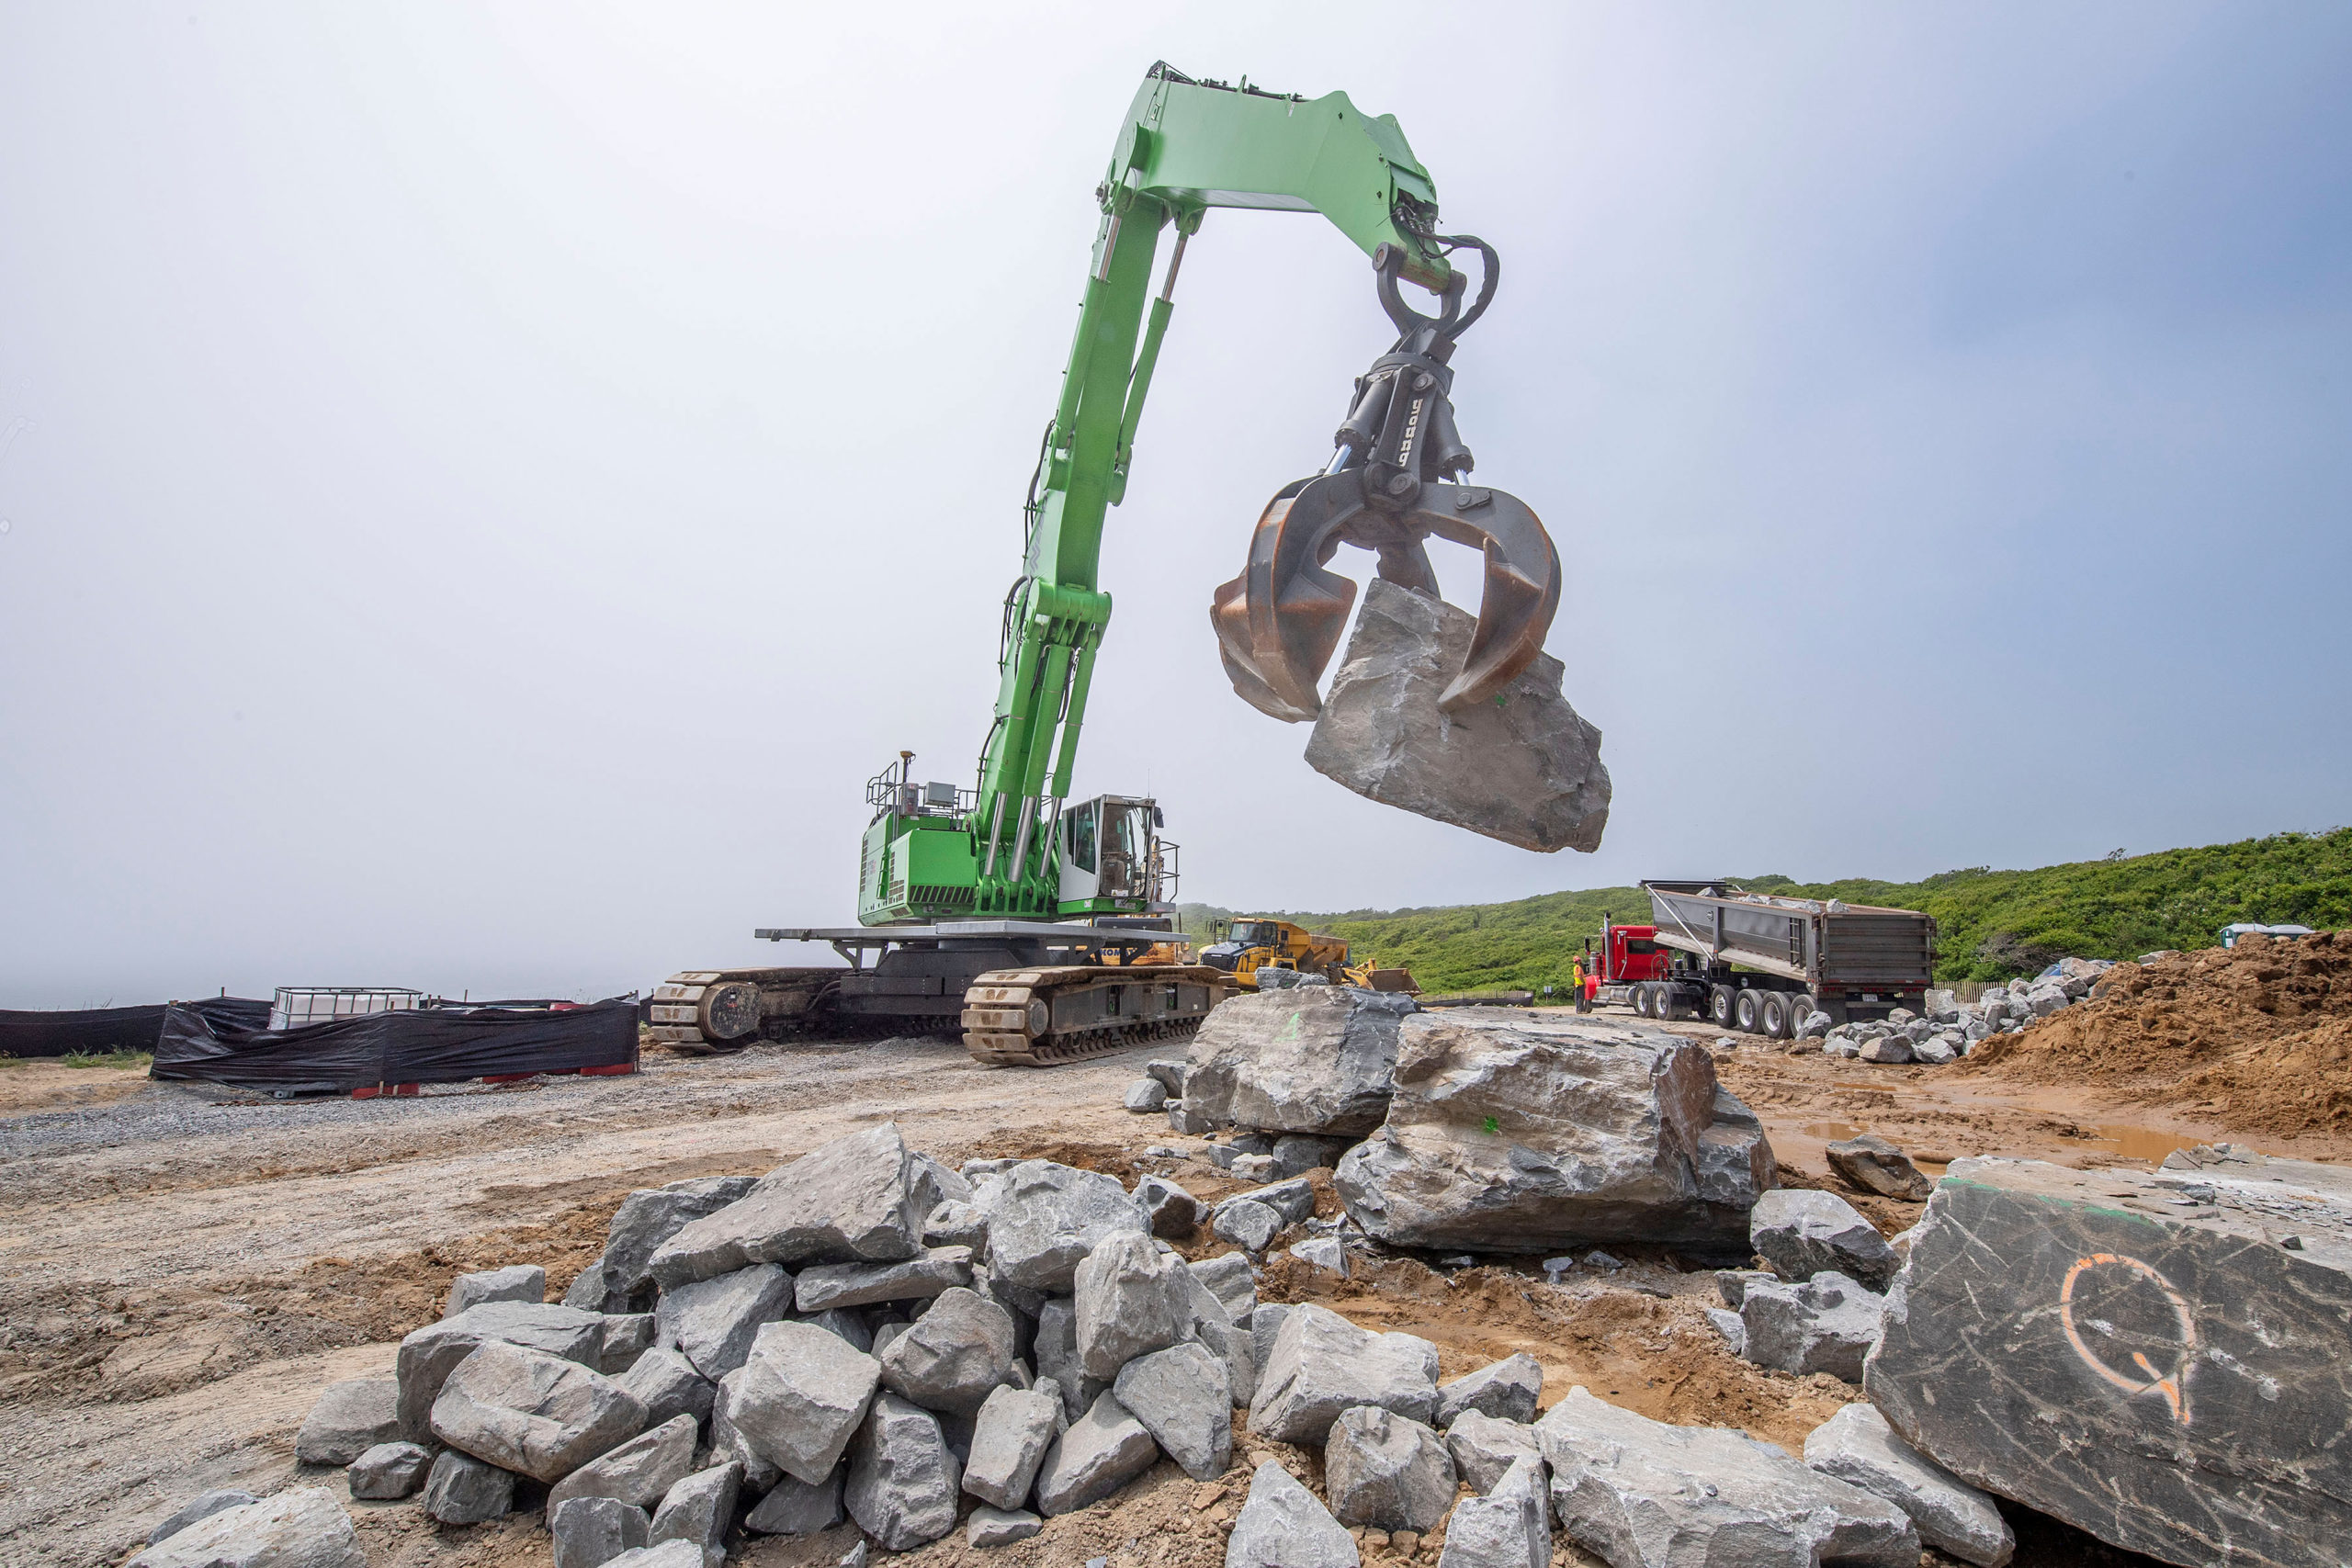 Large boulders - some as large as 15 tons - are moved by a large claw-tipped excavator after being transported from a quarry in upstate New York as part of the Army Corps of Engineers' Montauk Point Revetment Project on Monday.  MICHAEL HELLER